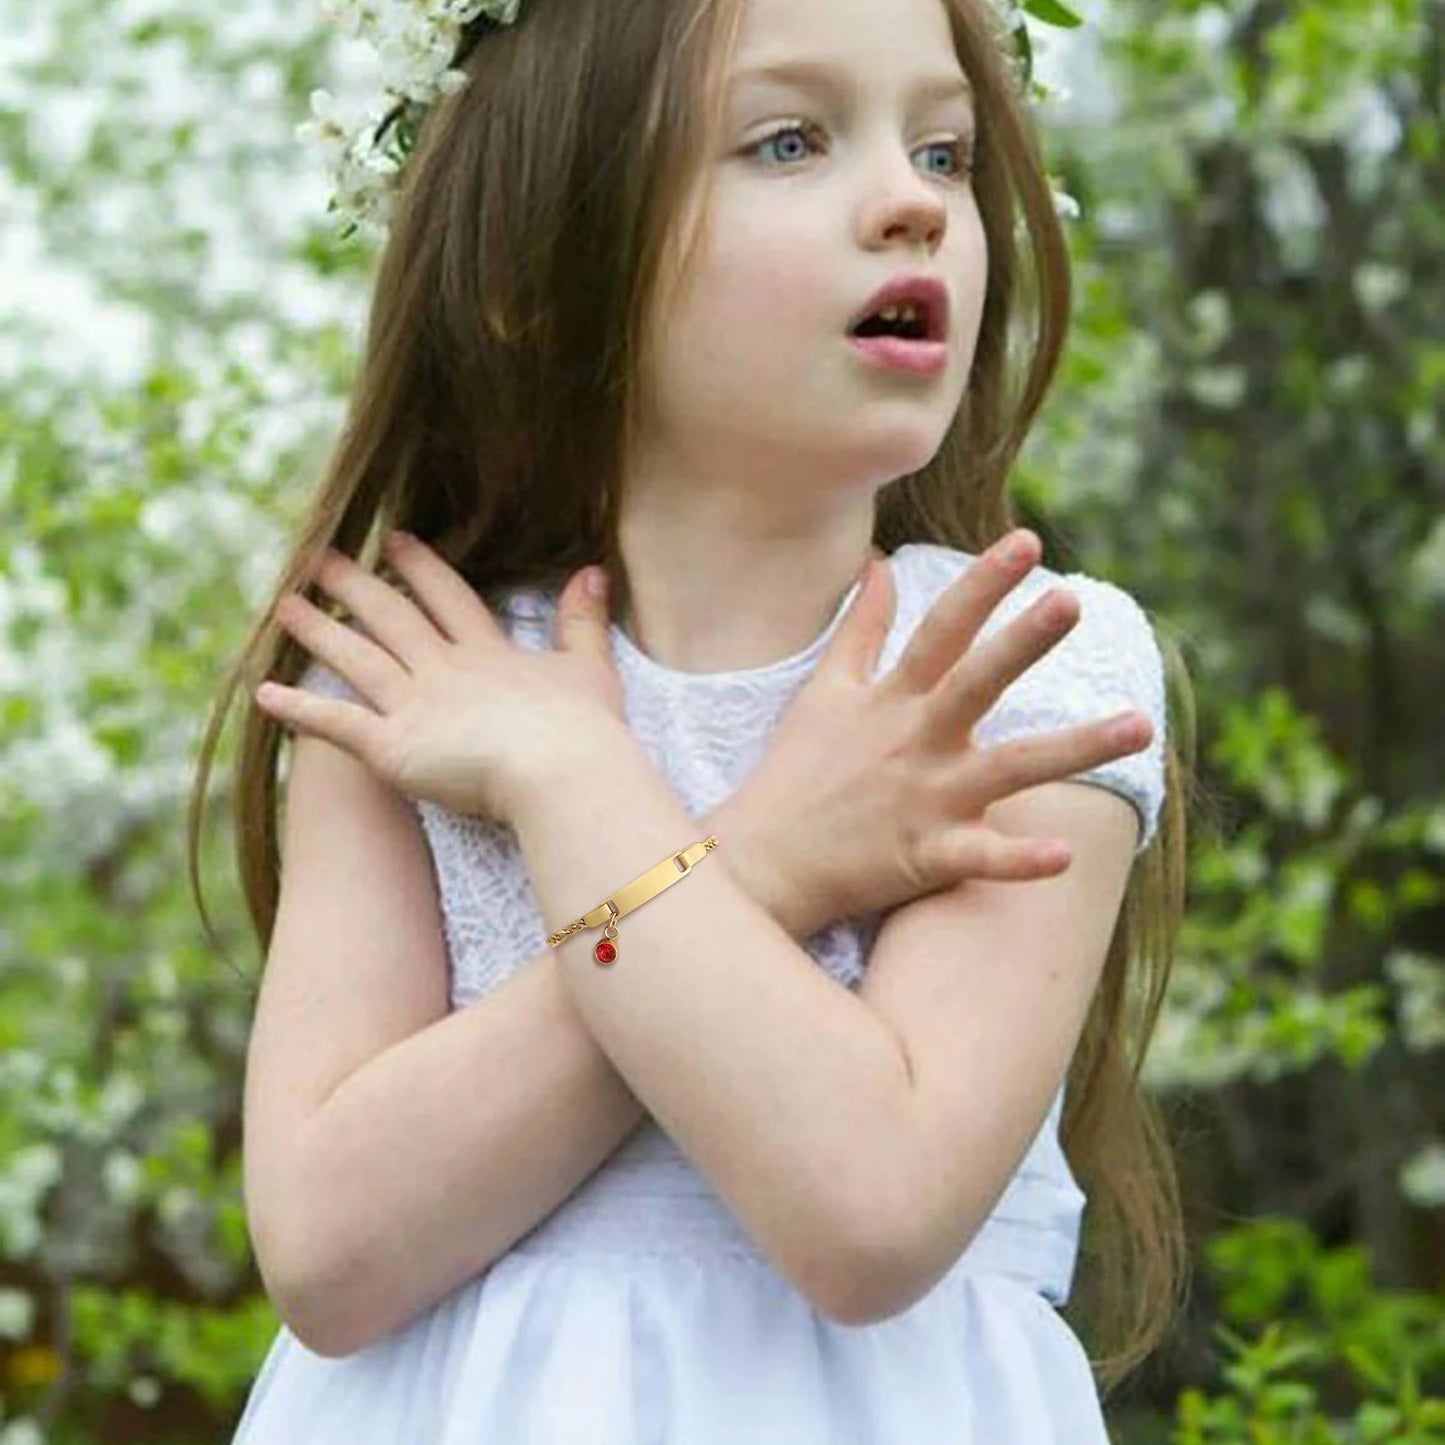 Baby and Children's Bracelets:  Steel with Gold IP Engravable Bracelets with Blue CZ Charm - Age 3 Months to 5 Years